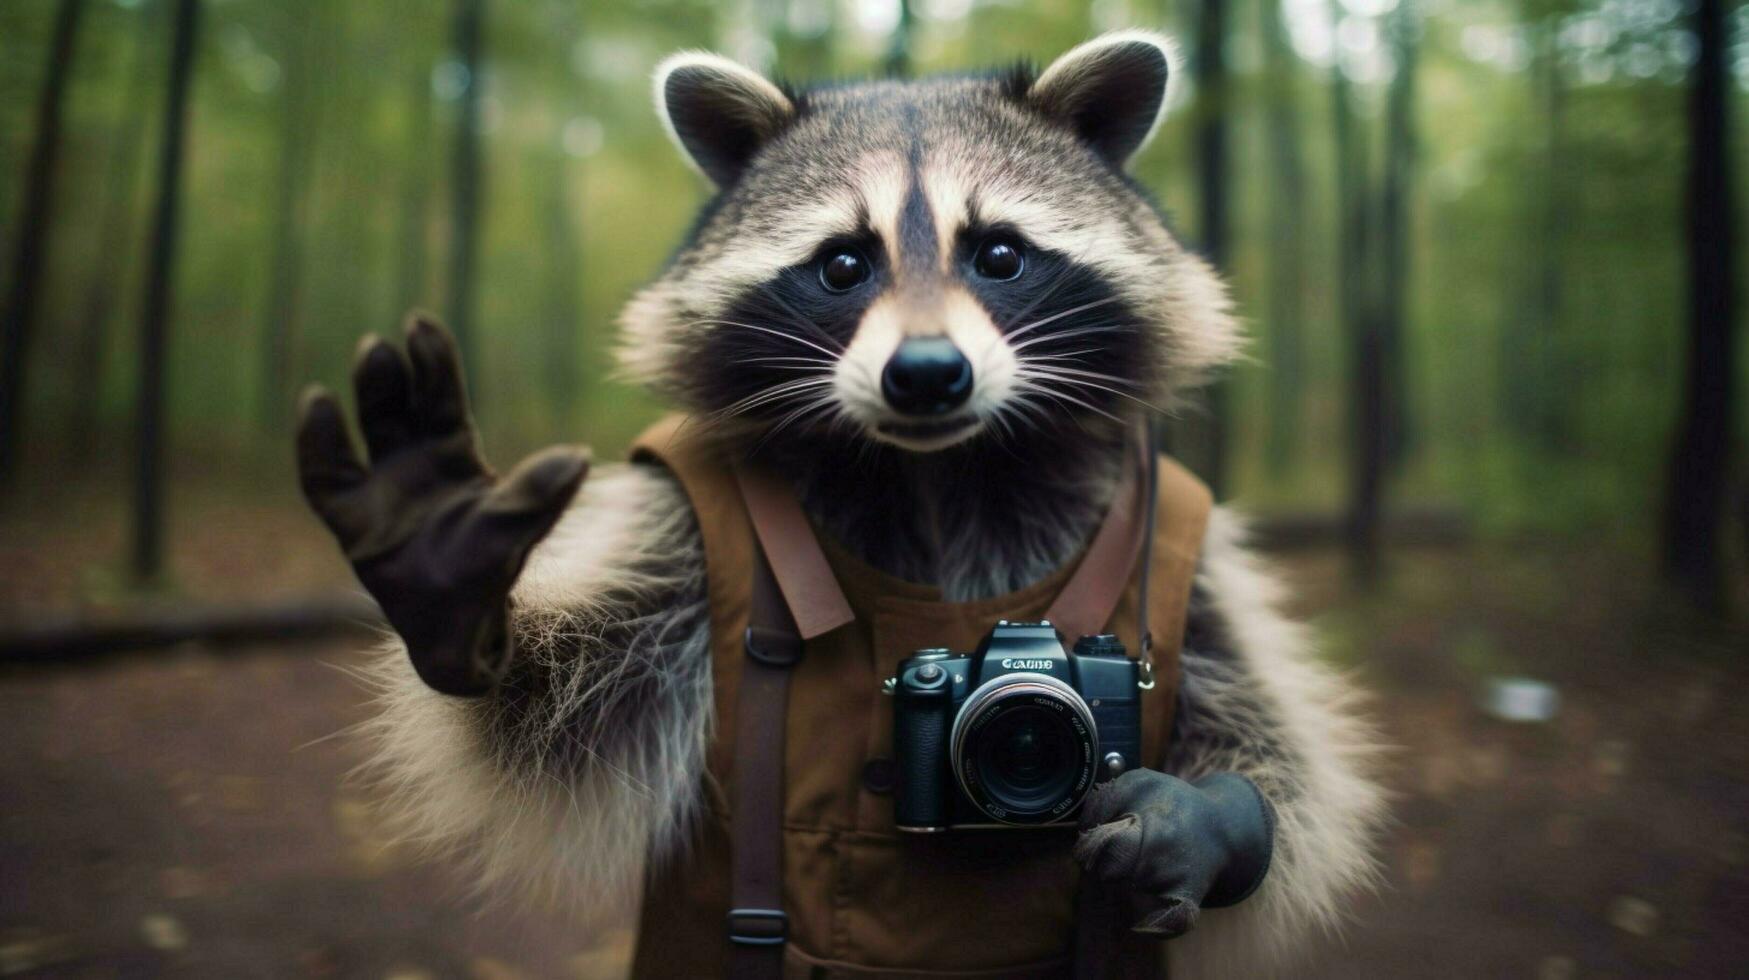 raccoon with a camera in his hand photo